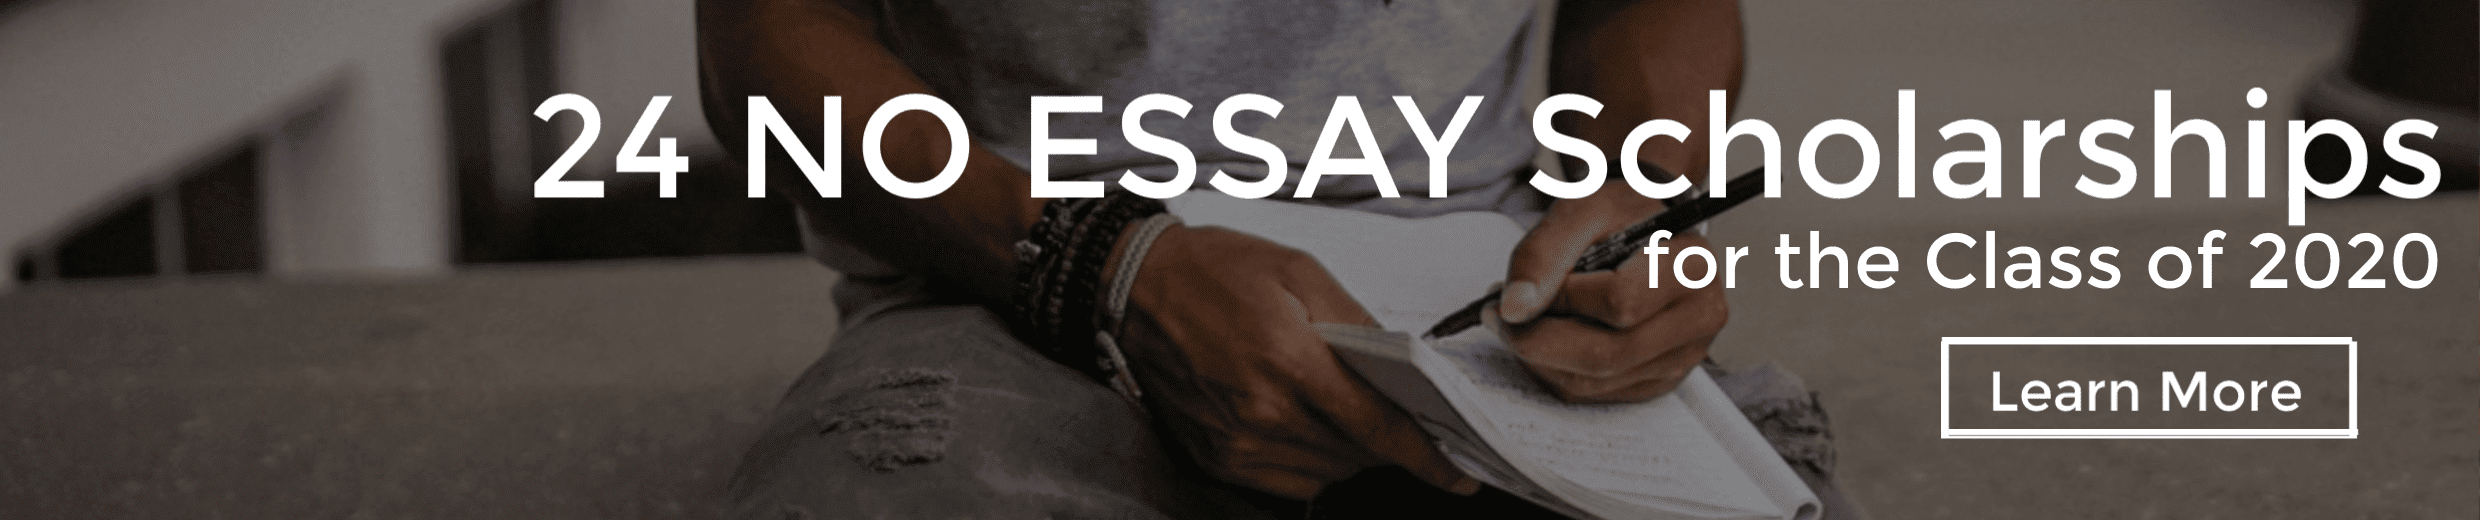 24 NO ESSAY Scholarships for the Class of 2020